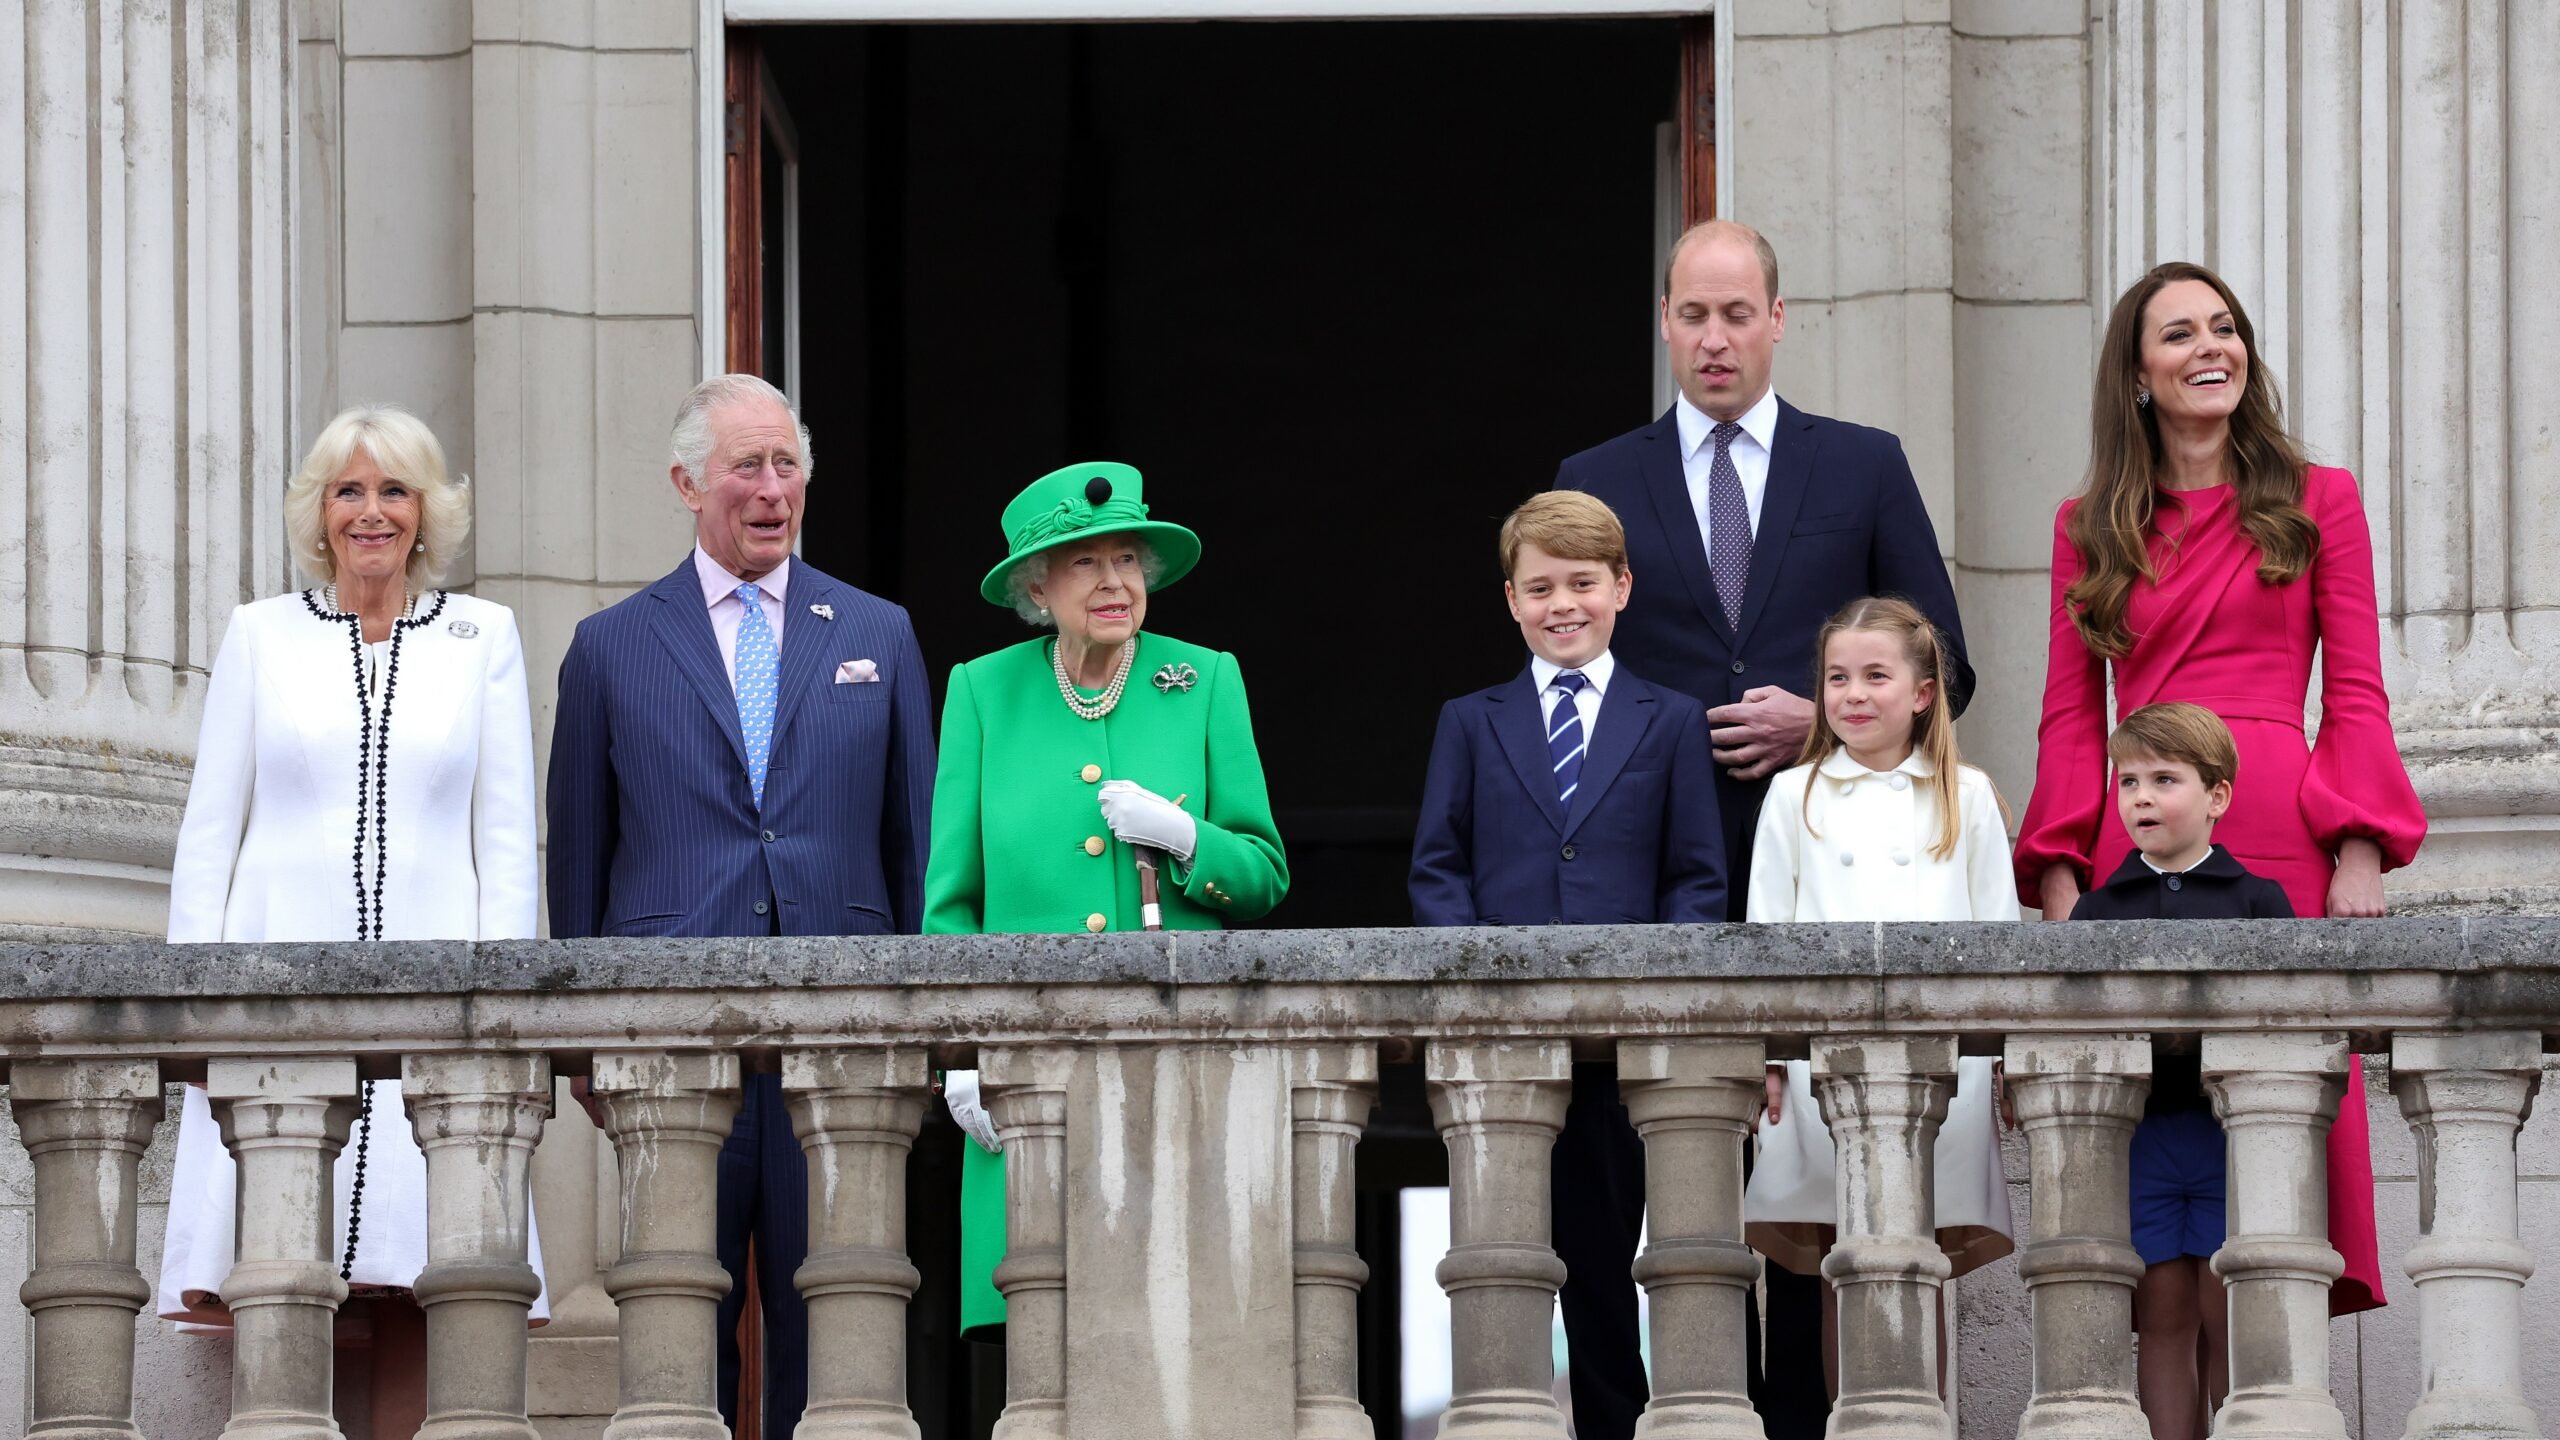 Camilla, Duchess of Cornwall, Prince Charles, Prince of Wales, Queen Elizabeth II, Prince George of Cambridge, Prince William, Duke of Cambridge, Princess Charlotte of Cambridge, Catherine, Duchess of Cambridge and Prince Louis of Cambridge on the balcony of Buckingham Palace during the Platinum Jubilee Pageant on June 05, 2022 in London, England. The Platinum Jubilee of Elizabeth II is being celebrated from June 2 to June 5, 2022, in the UK and Commonwealth to mark the 70th anniversary of the accession of Queen Elizabeth II on 6 February 1952. (Photo by Chris Jackson/Getty Images)